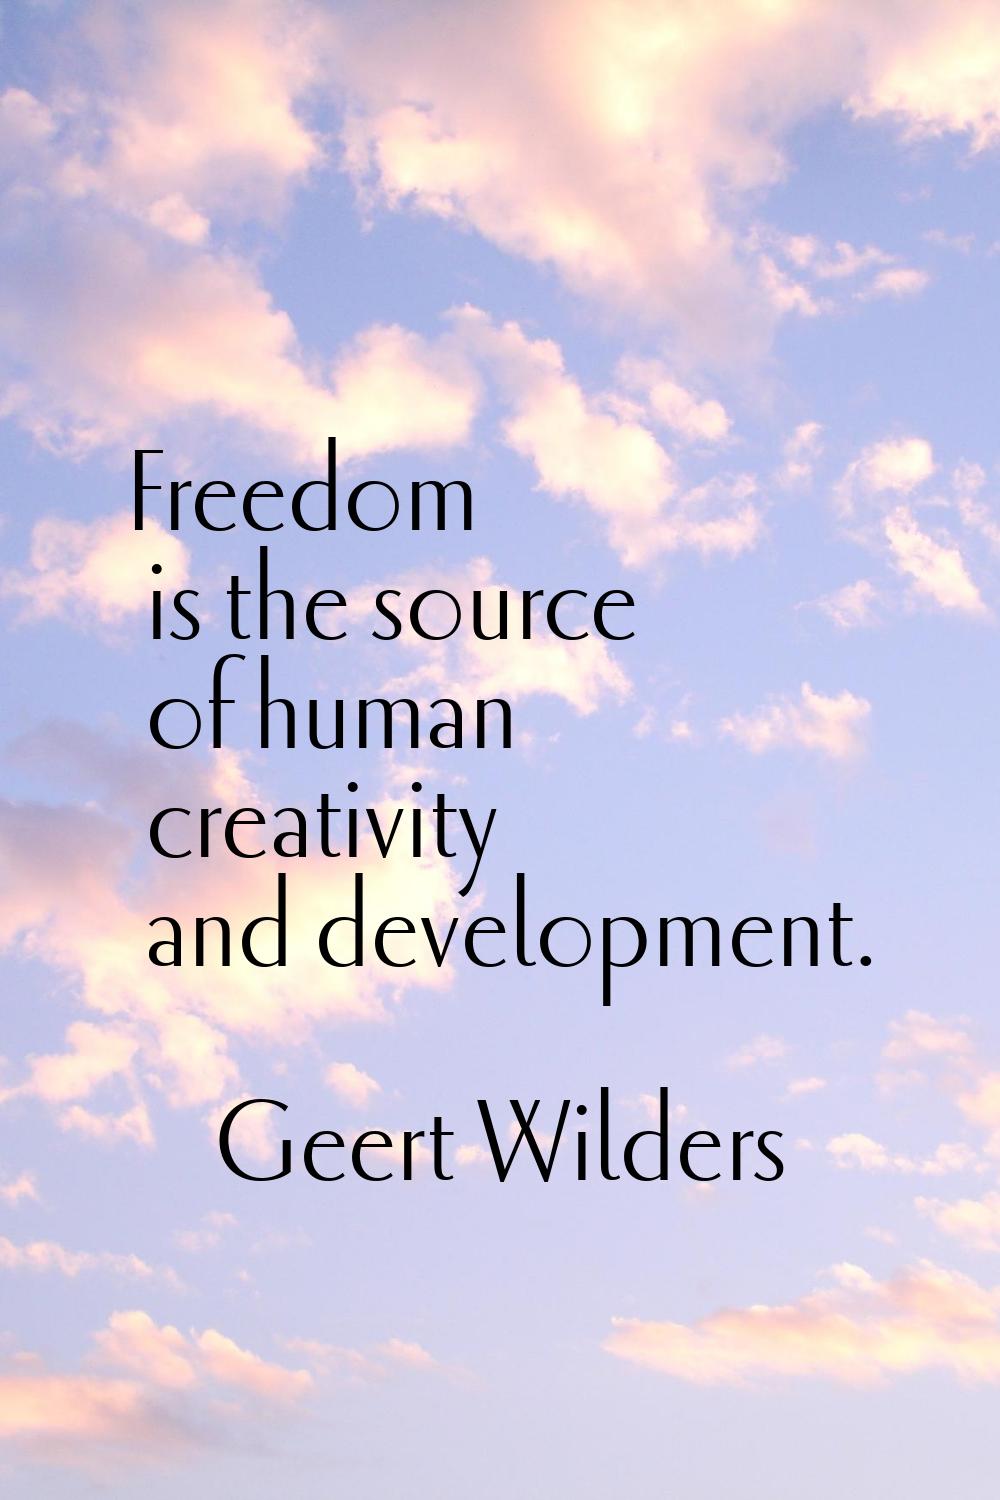 Freedom is the source of human creativity and development.